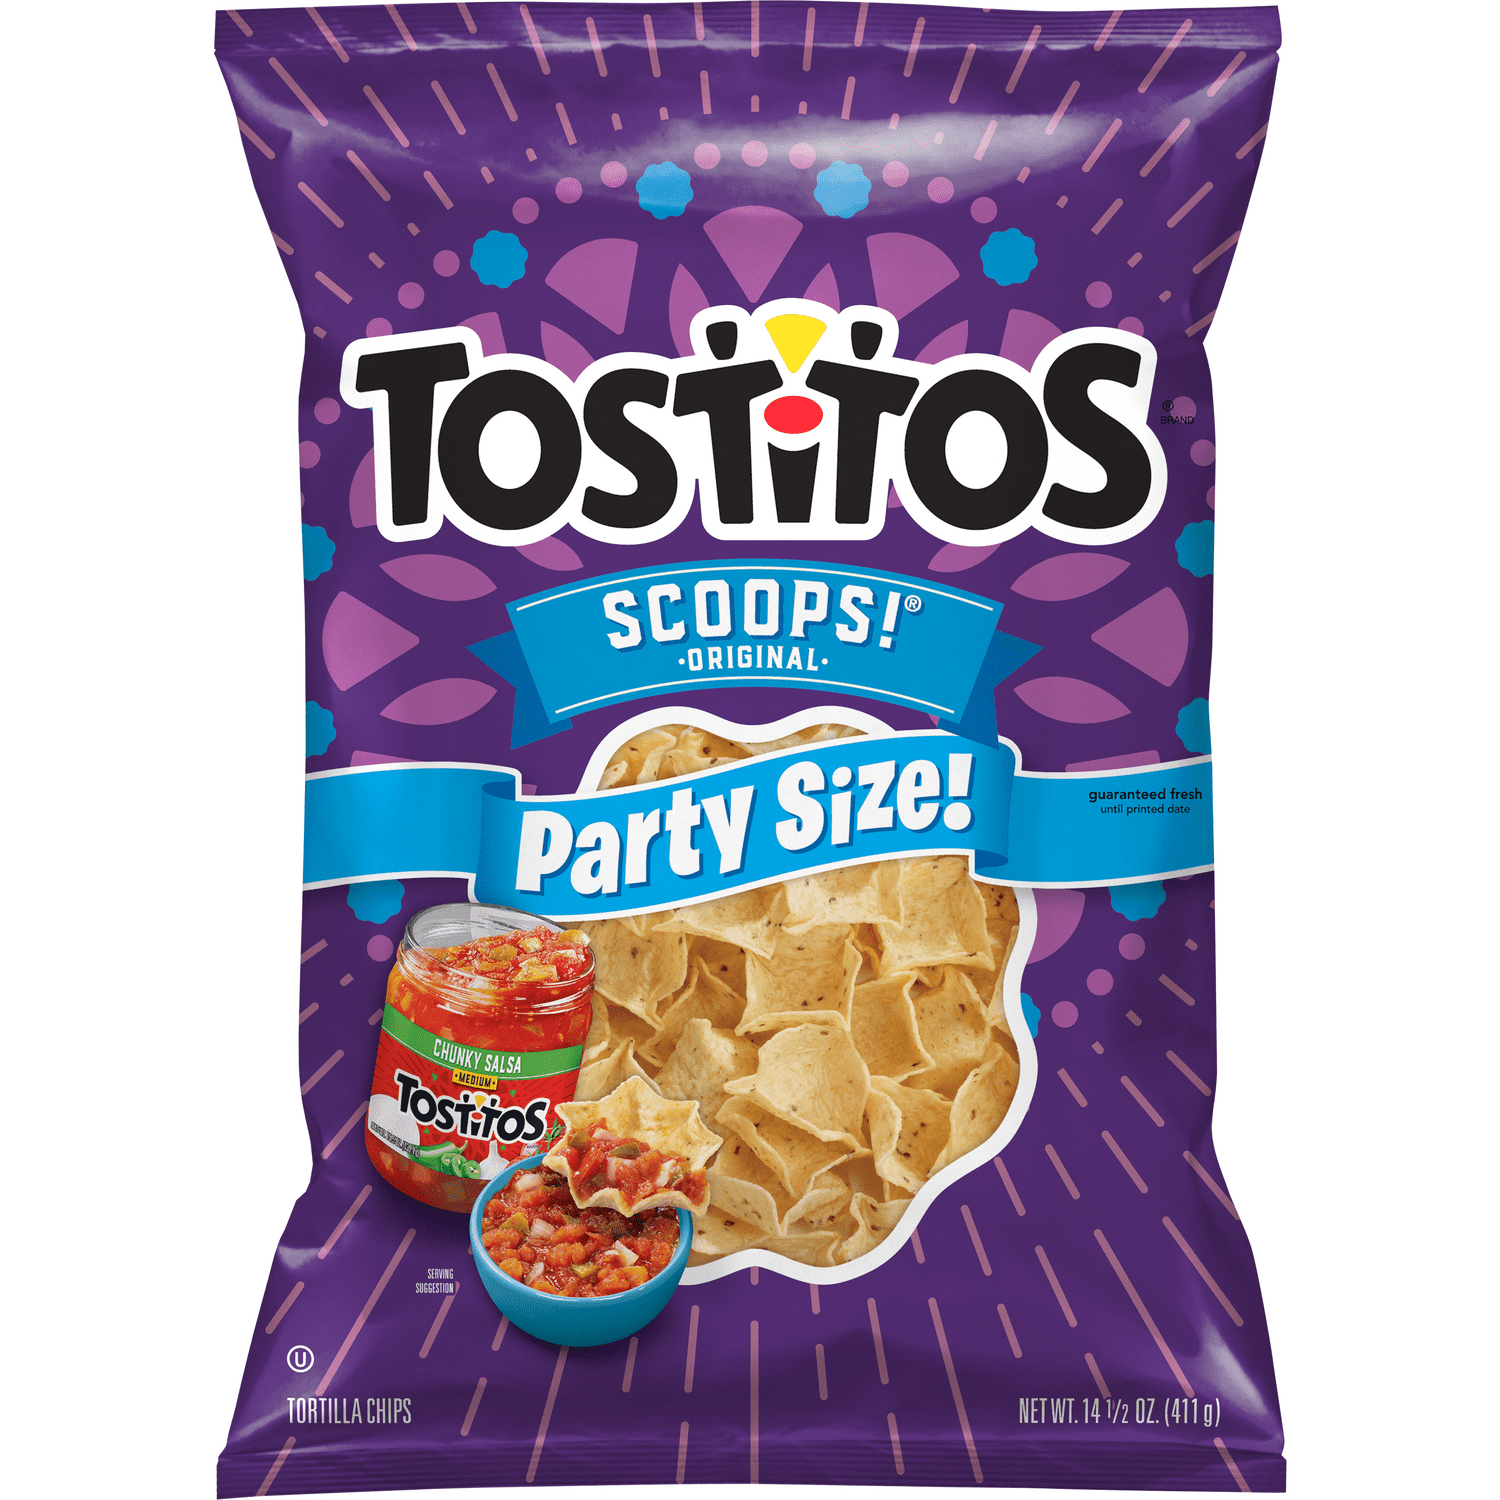 Tostitos Scoops! Tortilla Chips, Party Size, 14.5 oz Bag